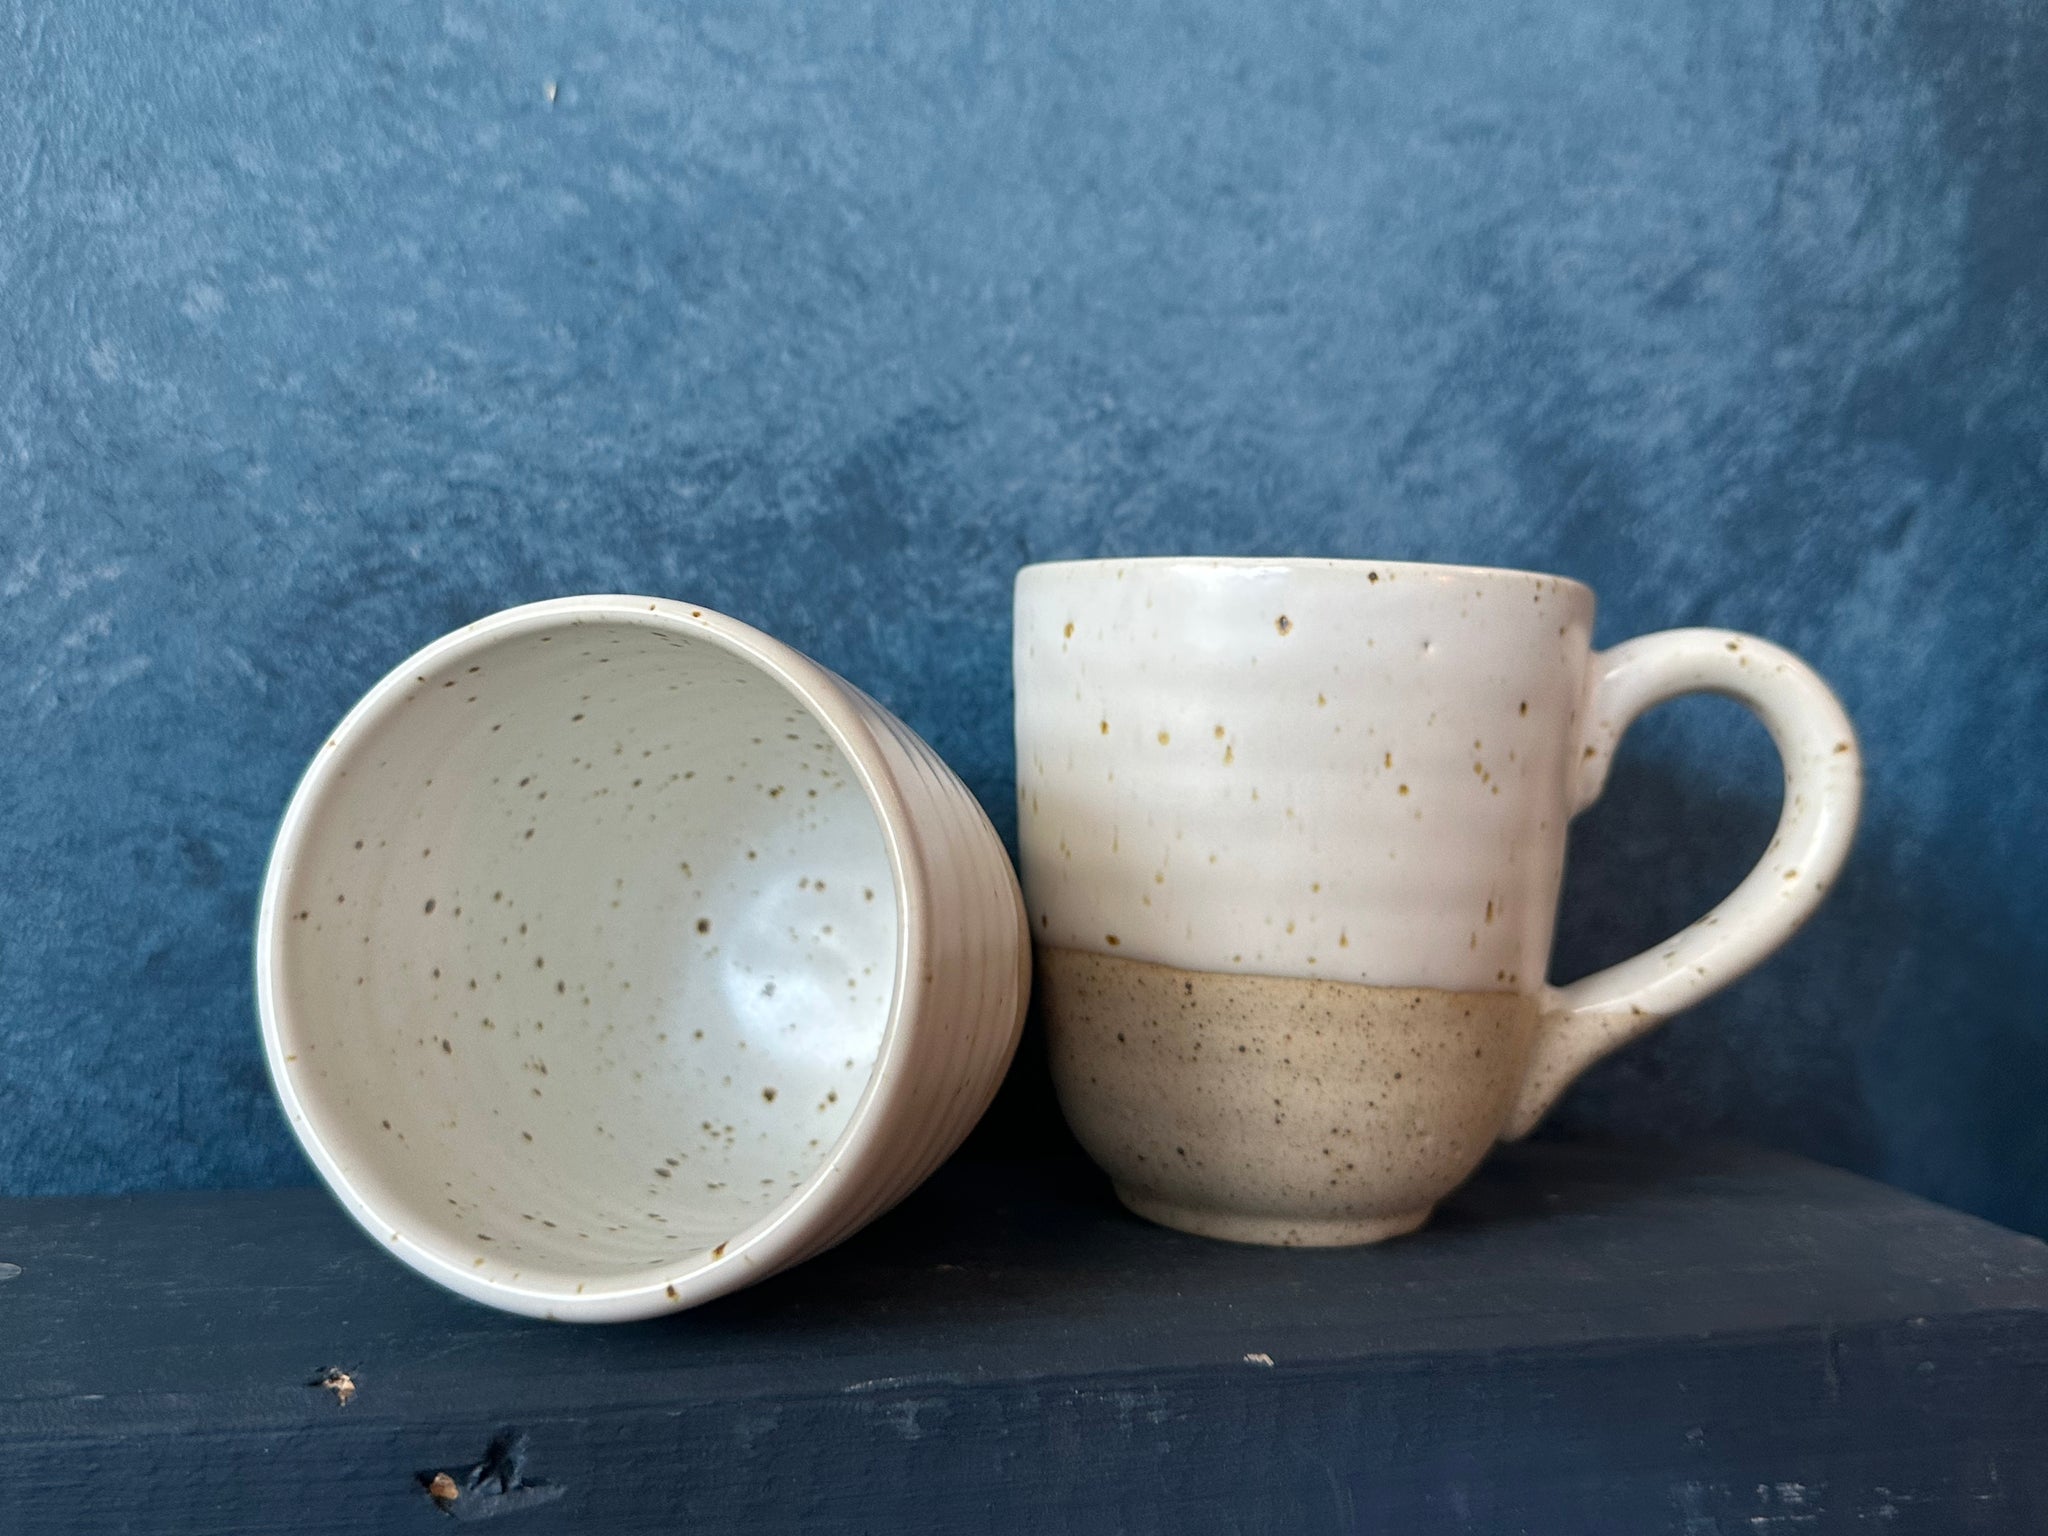 White speckled Half & half raw, with and without handle